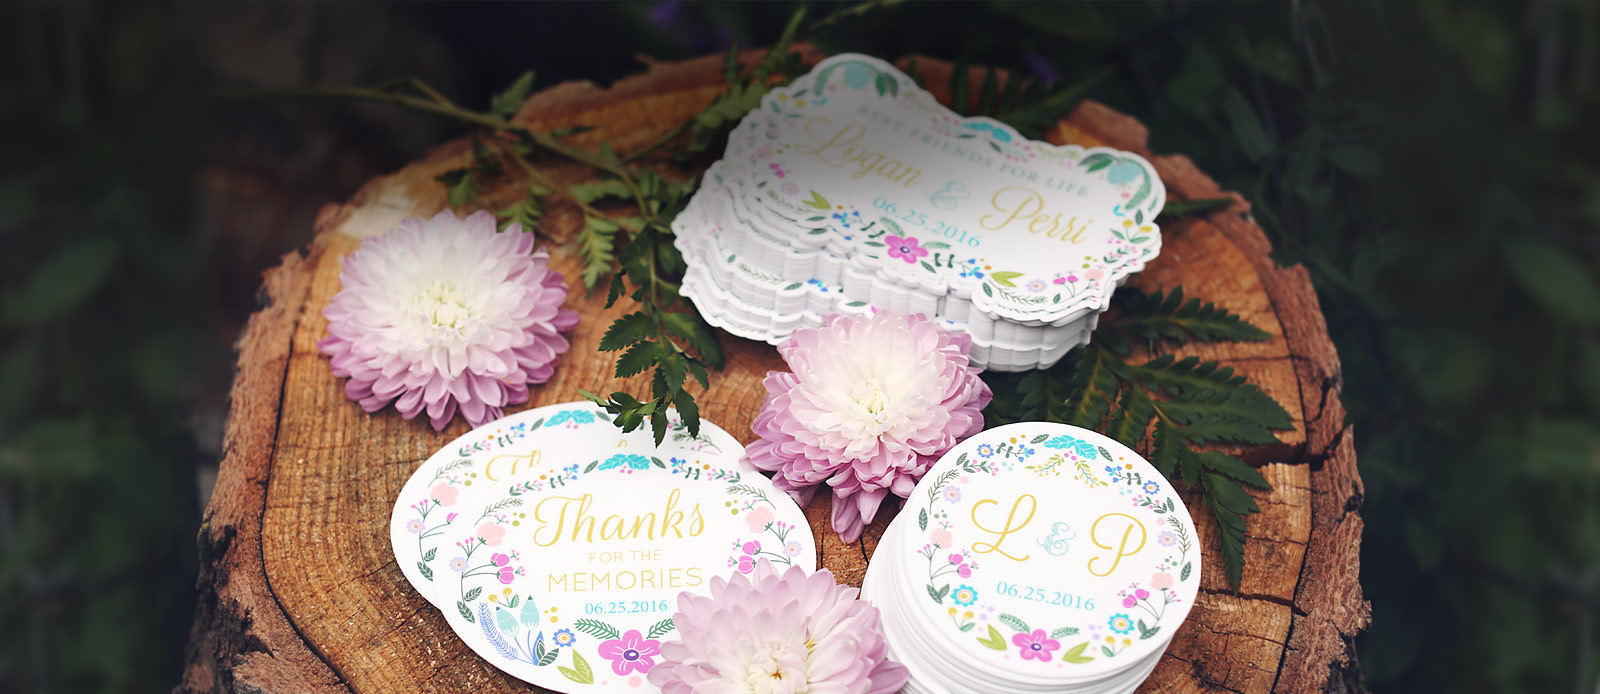 Stickers mariage